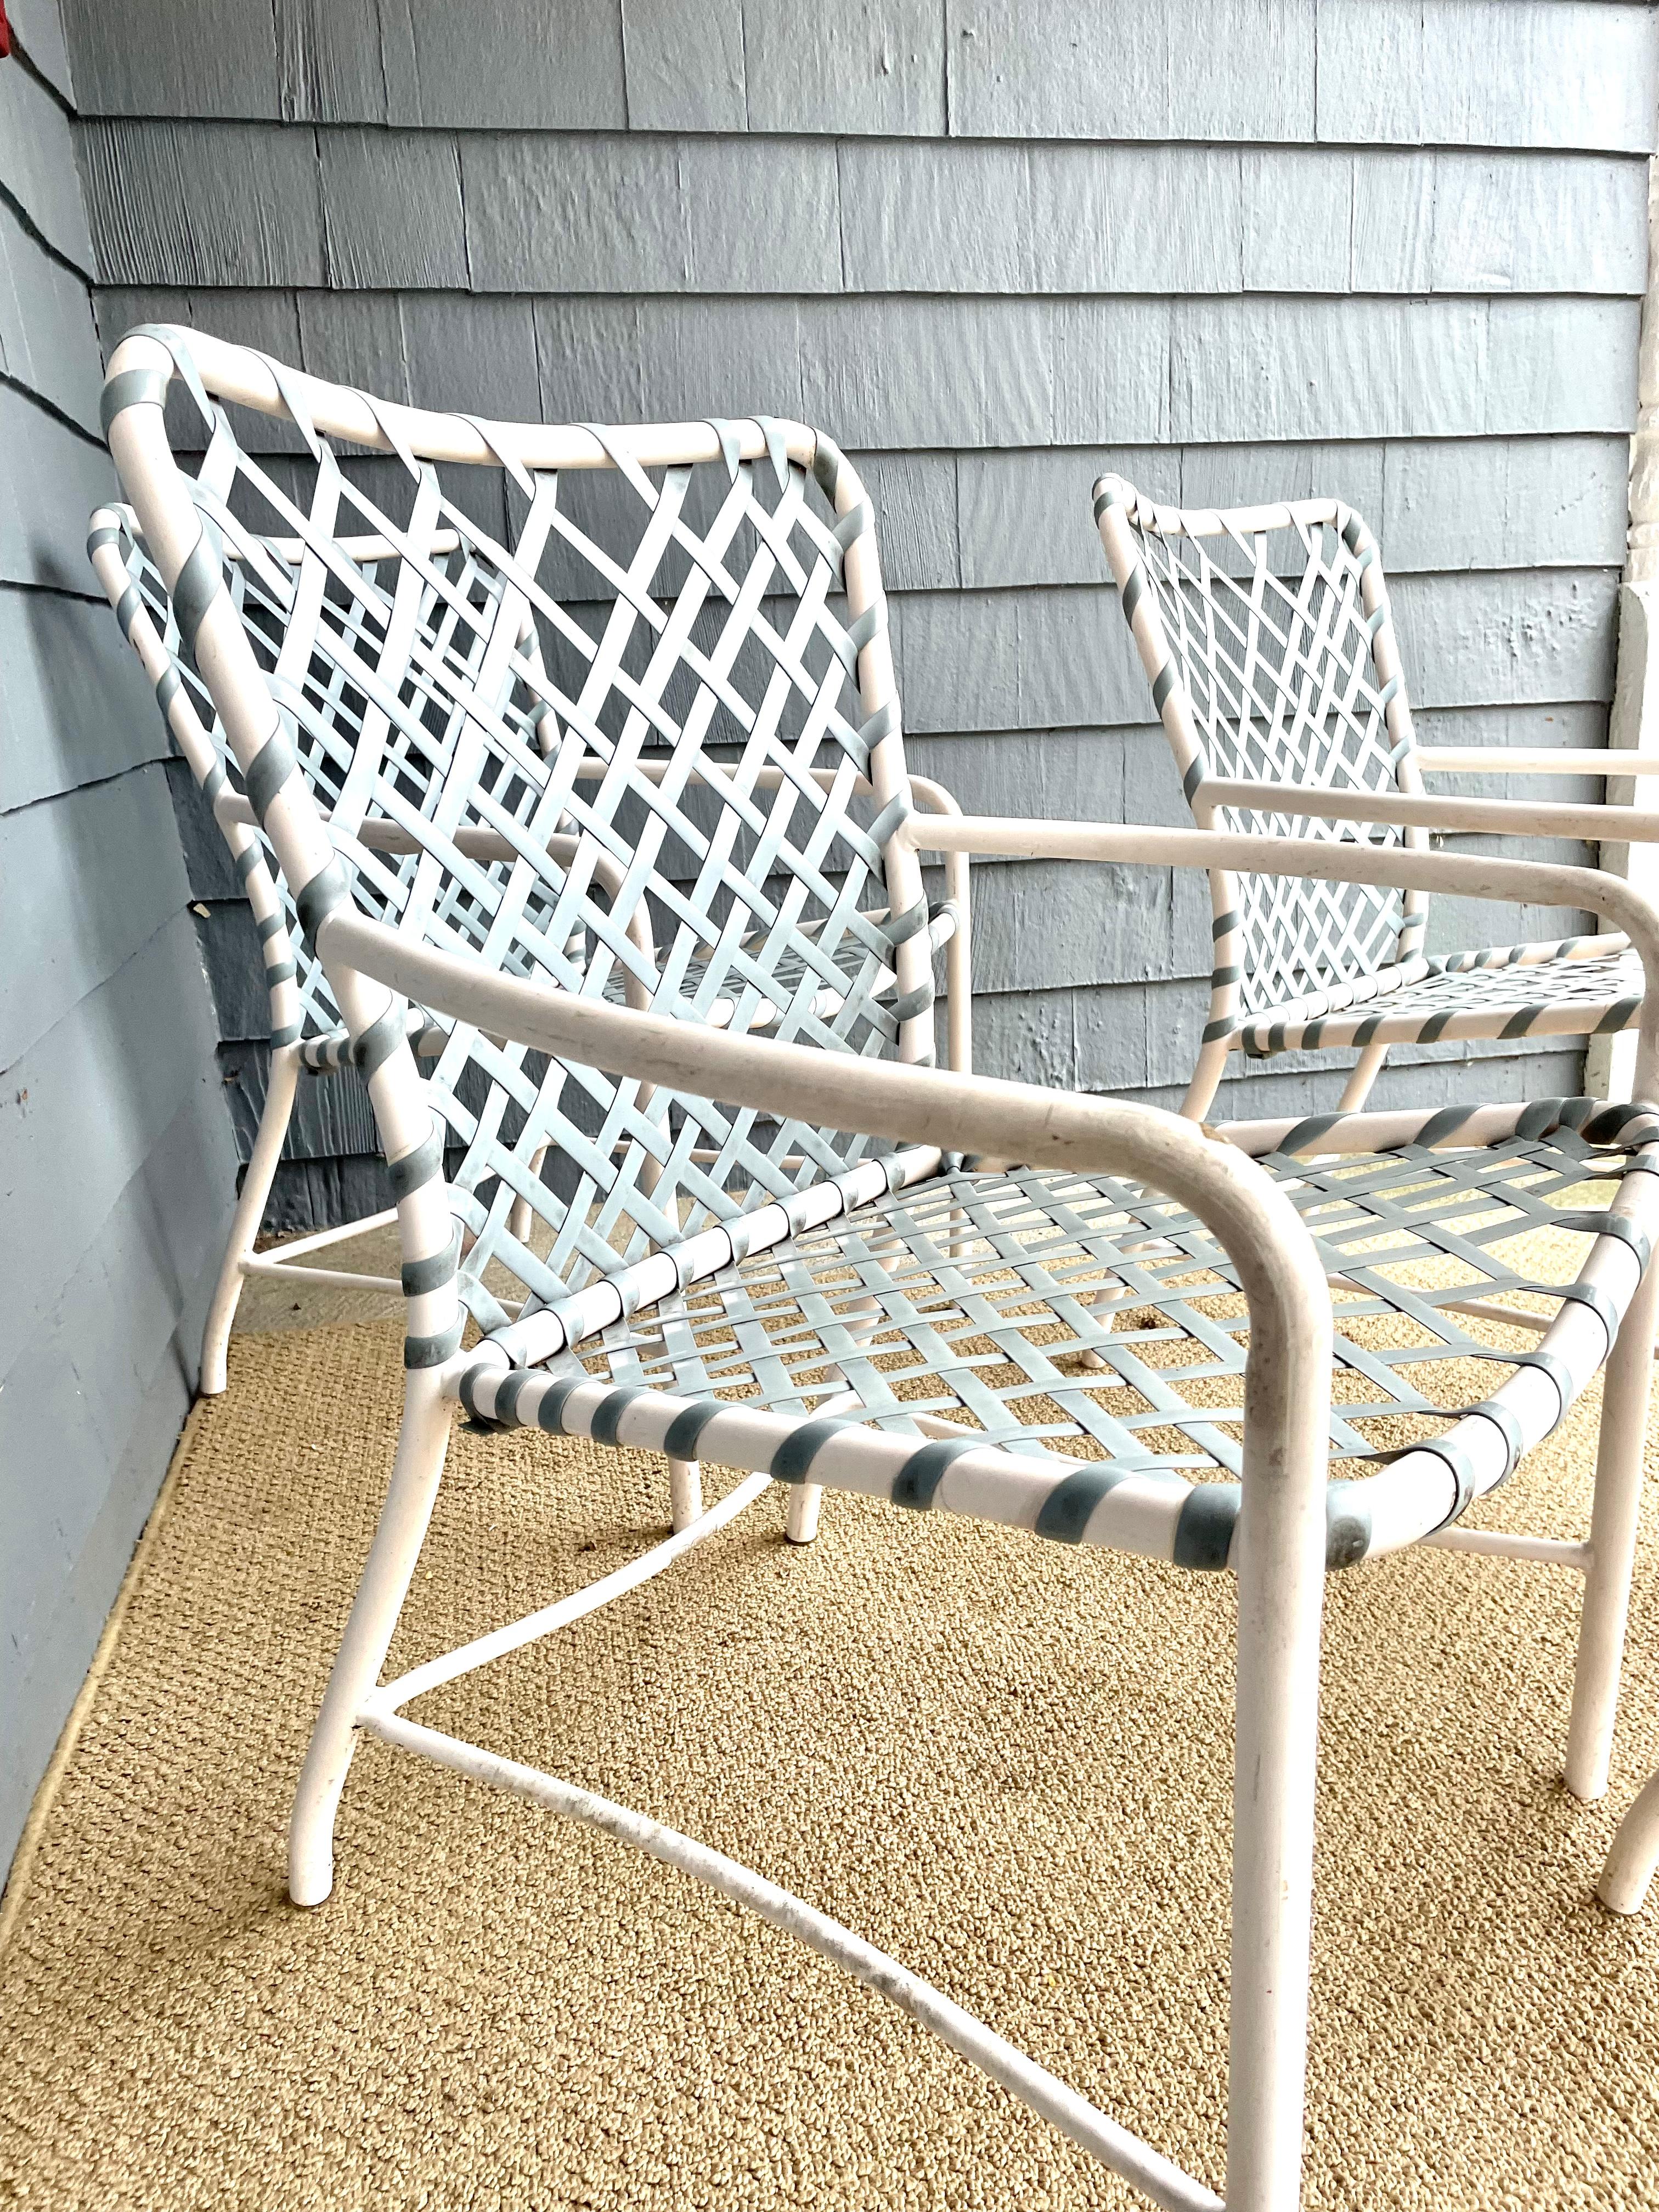 Mid-Century Modern Vintage Brown Jordan Outdoor Patio Chairs Troptione Strapped 